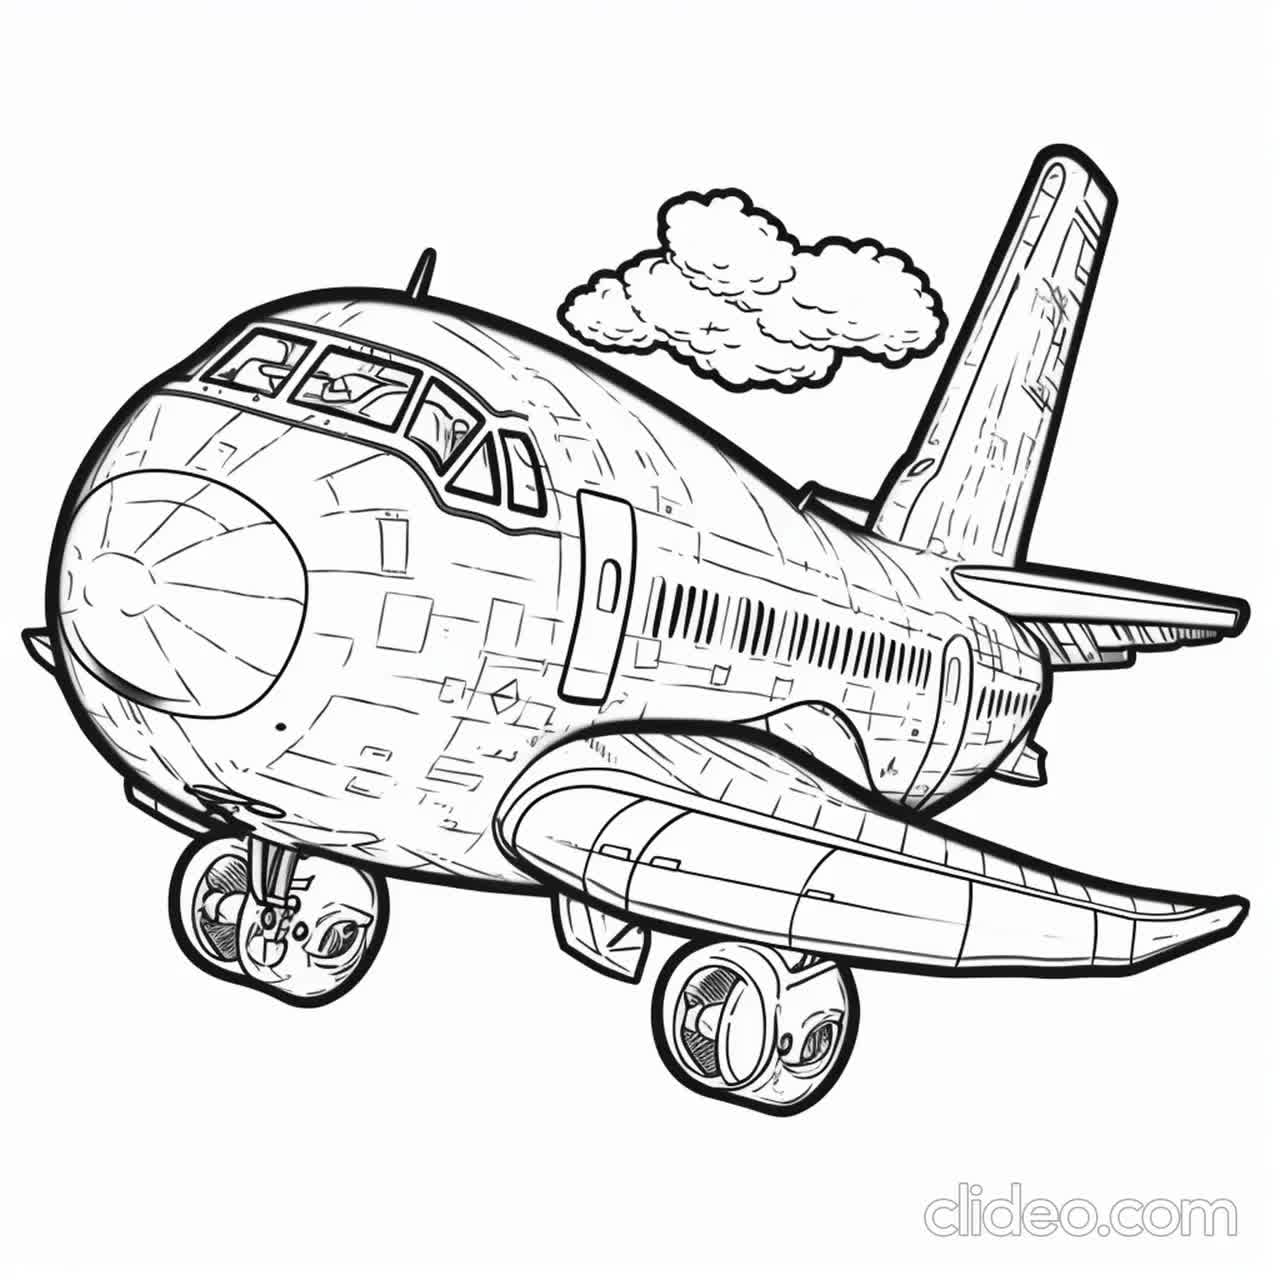 Coloring Book for Kids: Airplane Coloring Book for Kids: Amazing